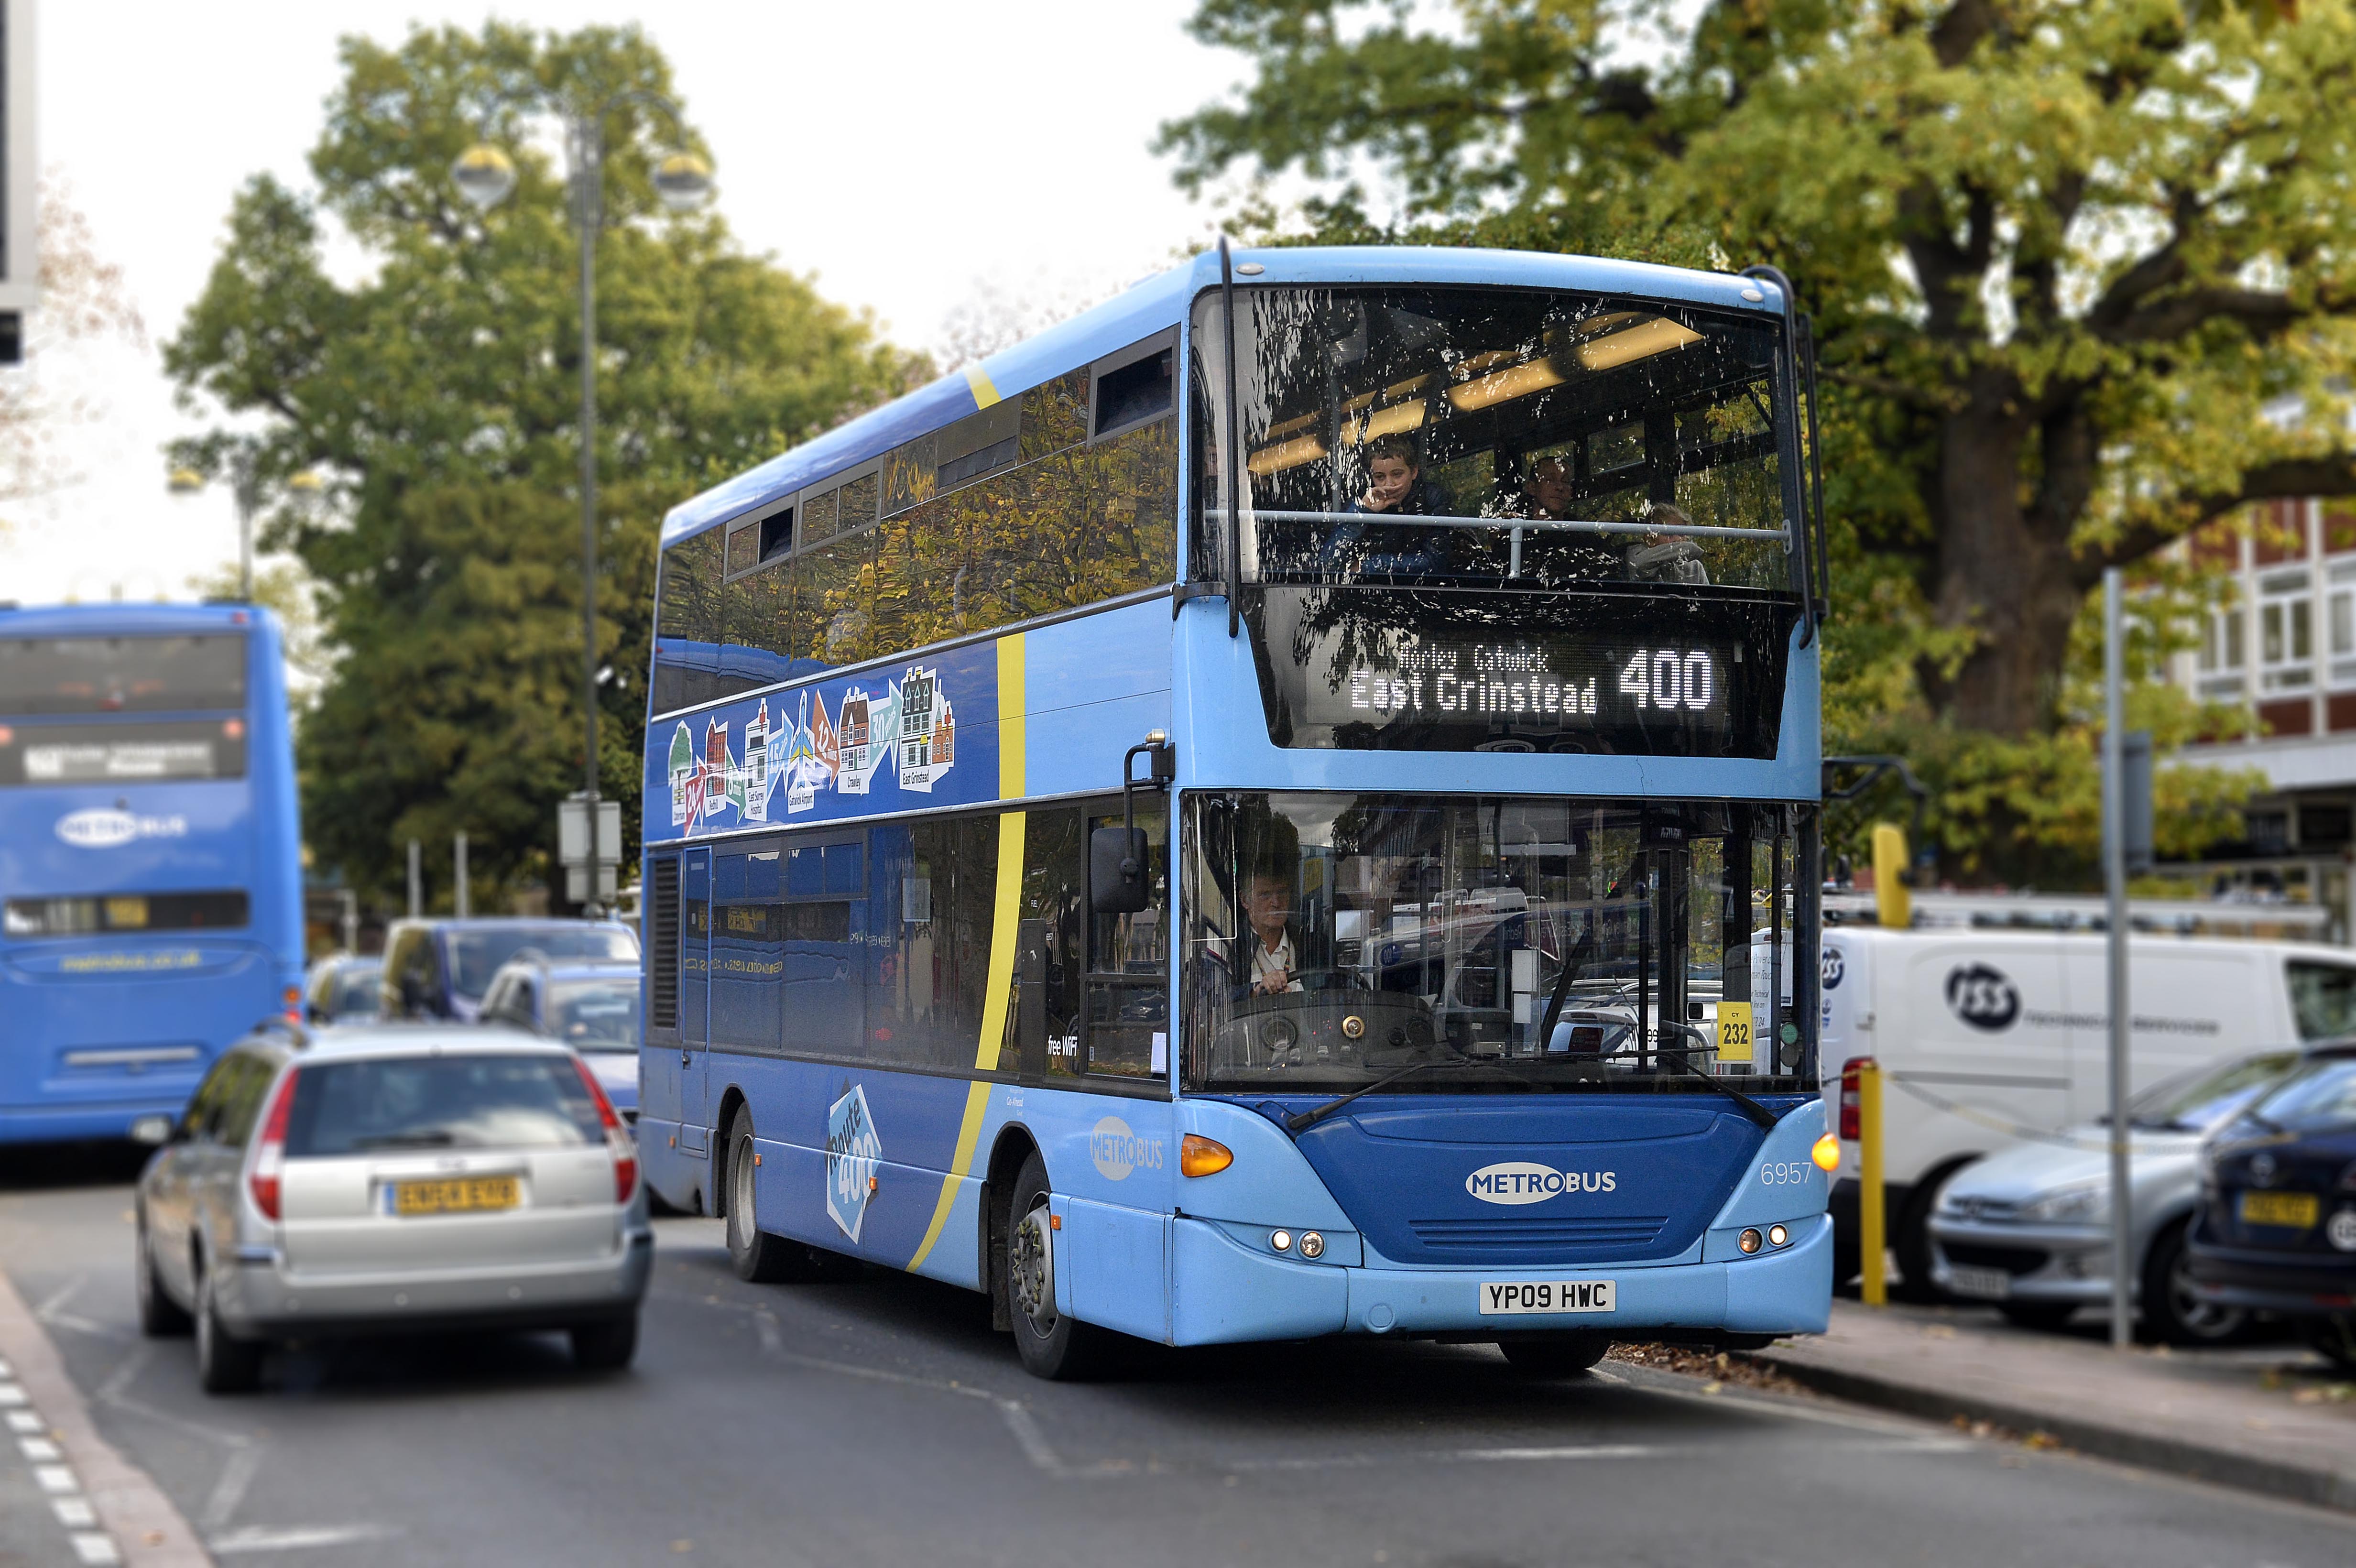 Metrobus shifts schedules for NHS staff